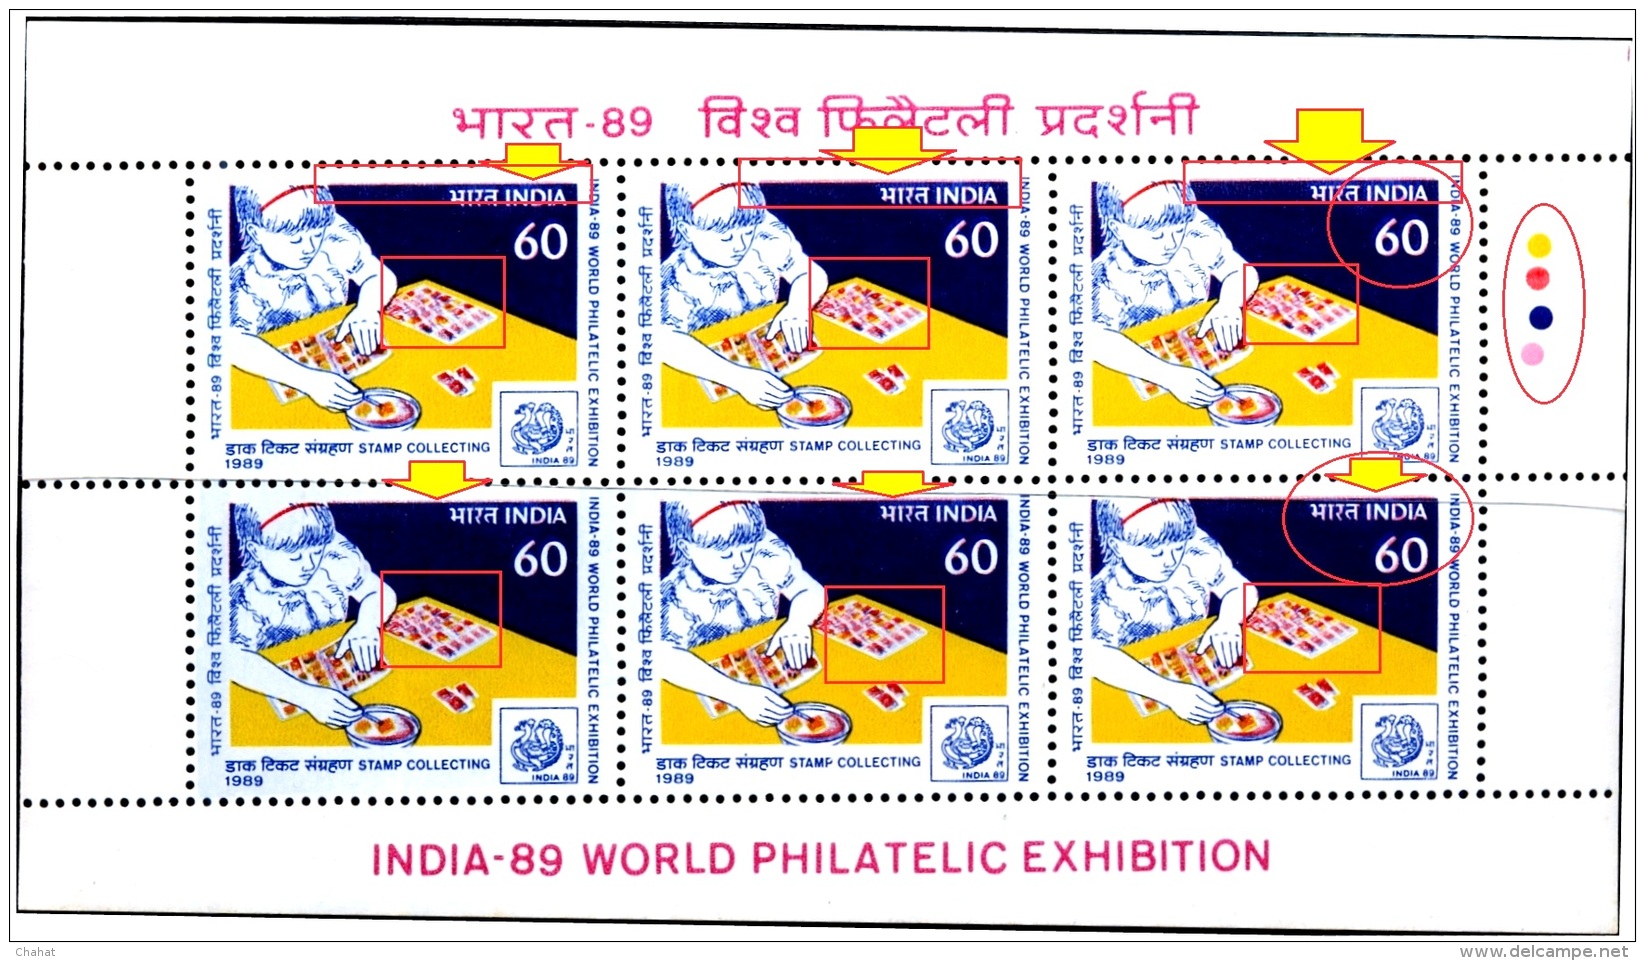 STAMP COLLECTING-ERROR-INDIA 89-WORLD PHILATELIC EXHIBITION-BOOKLET PANES-EXTREMELY SCARCE-MNH-M-151 - Errors, Freaks & Oddities (EFO)